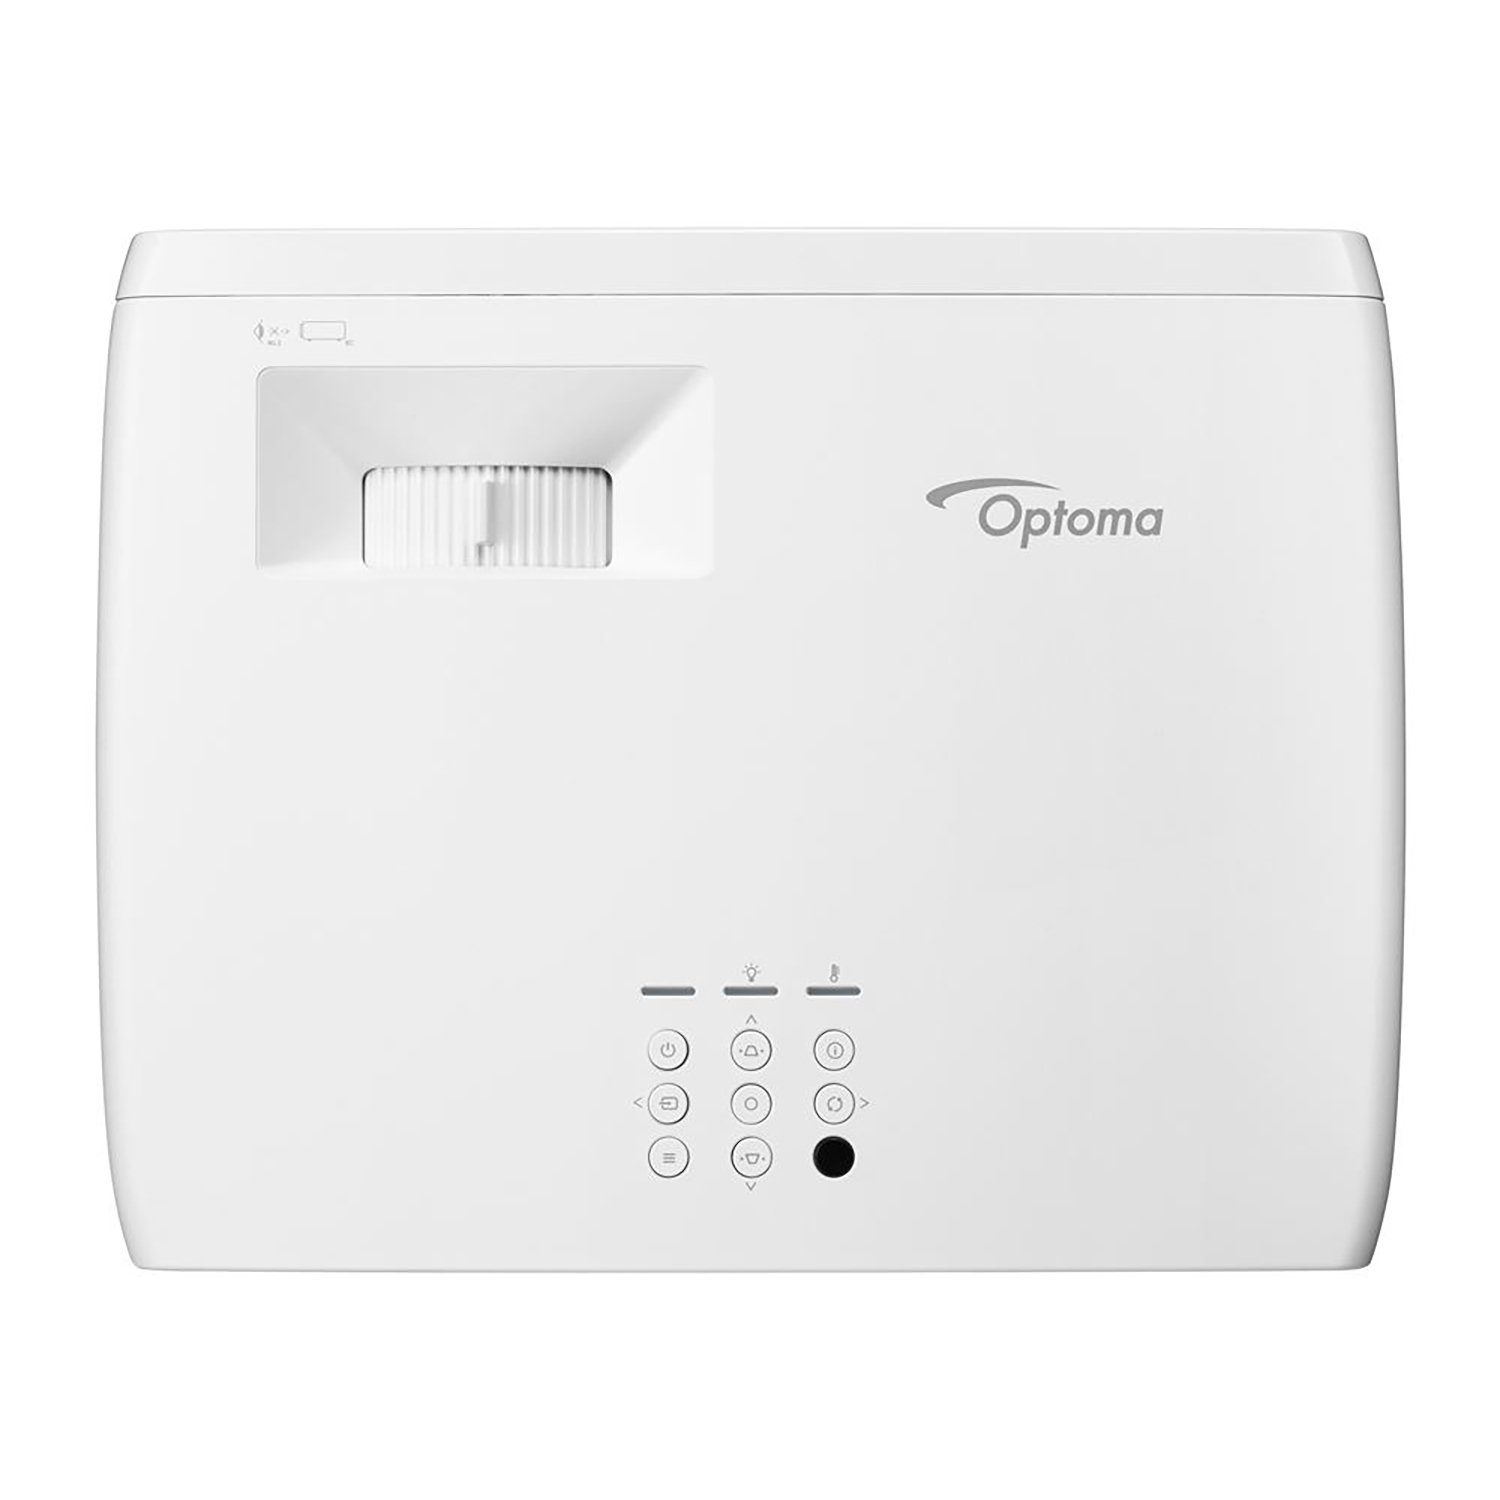 Optoma GT2100HDR 3D-Beamer (4200 px) 1920 1080 x lm, 2000000:1